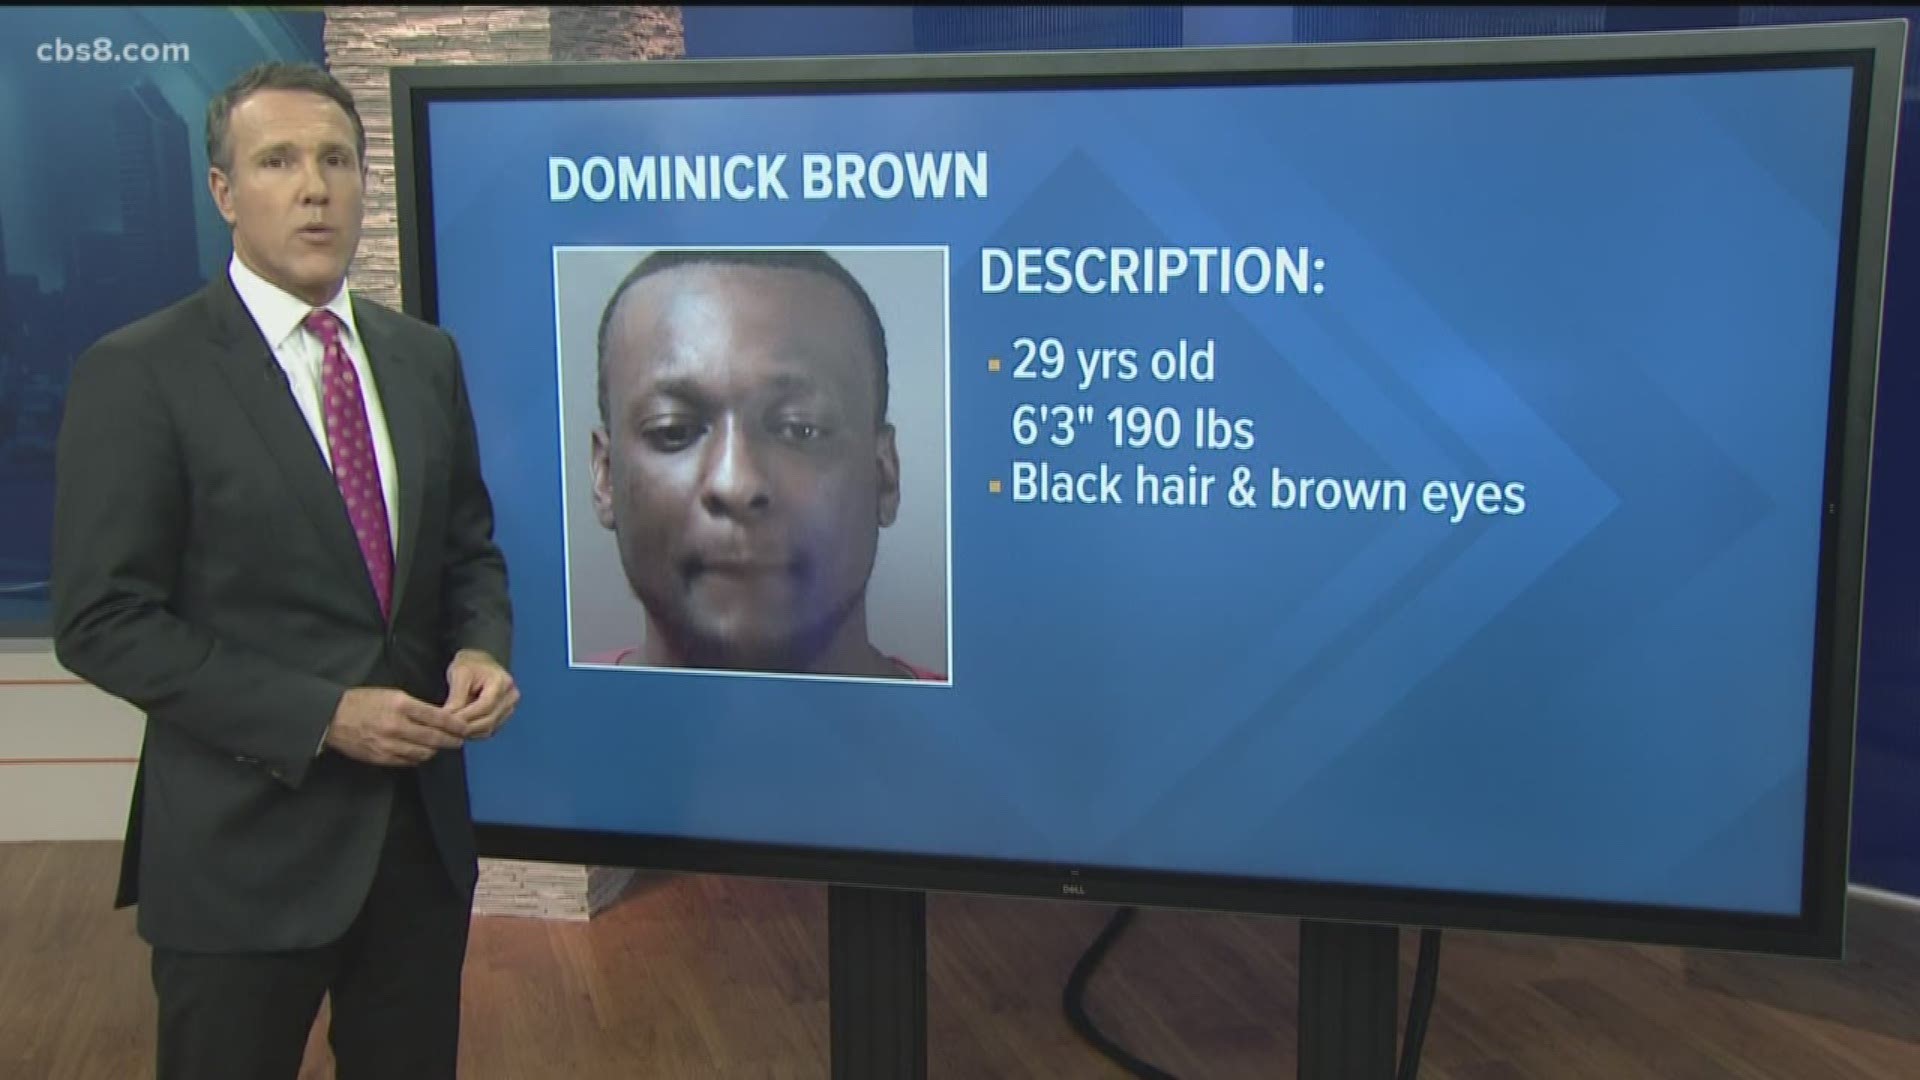 Dominick Leshan Brown is known to frequent City Heights